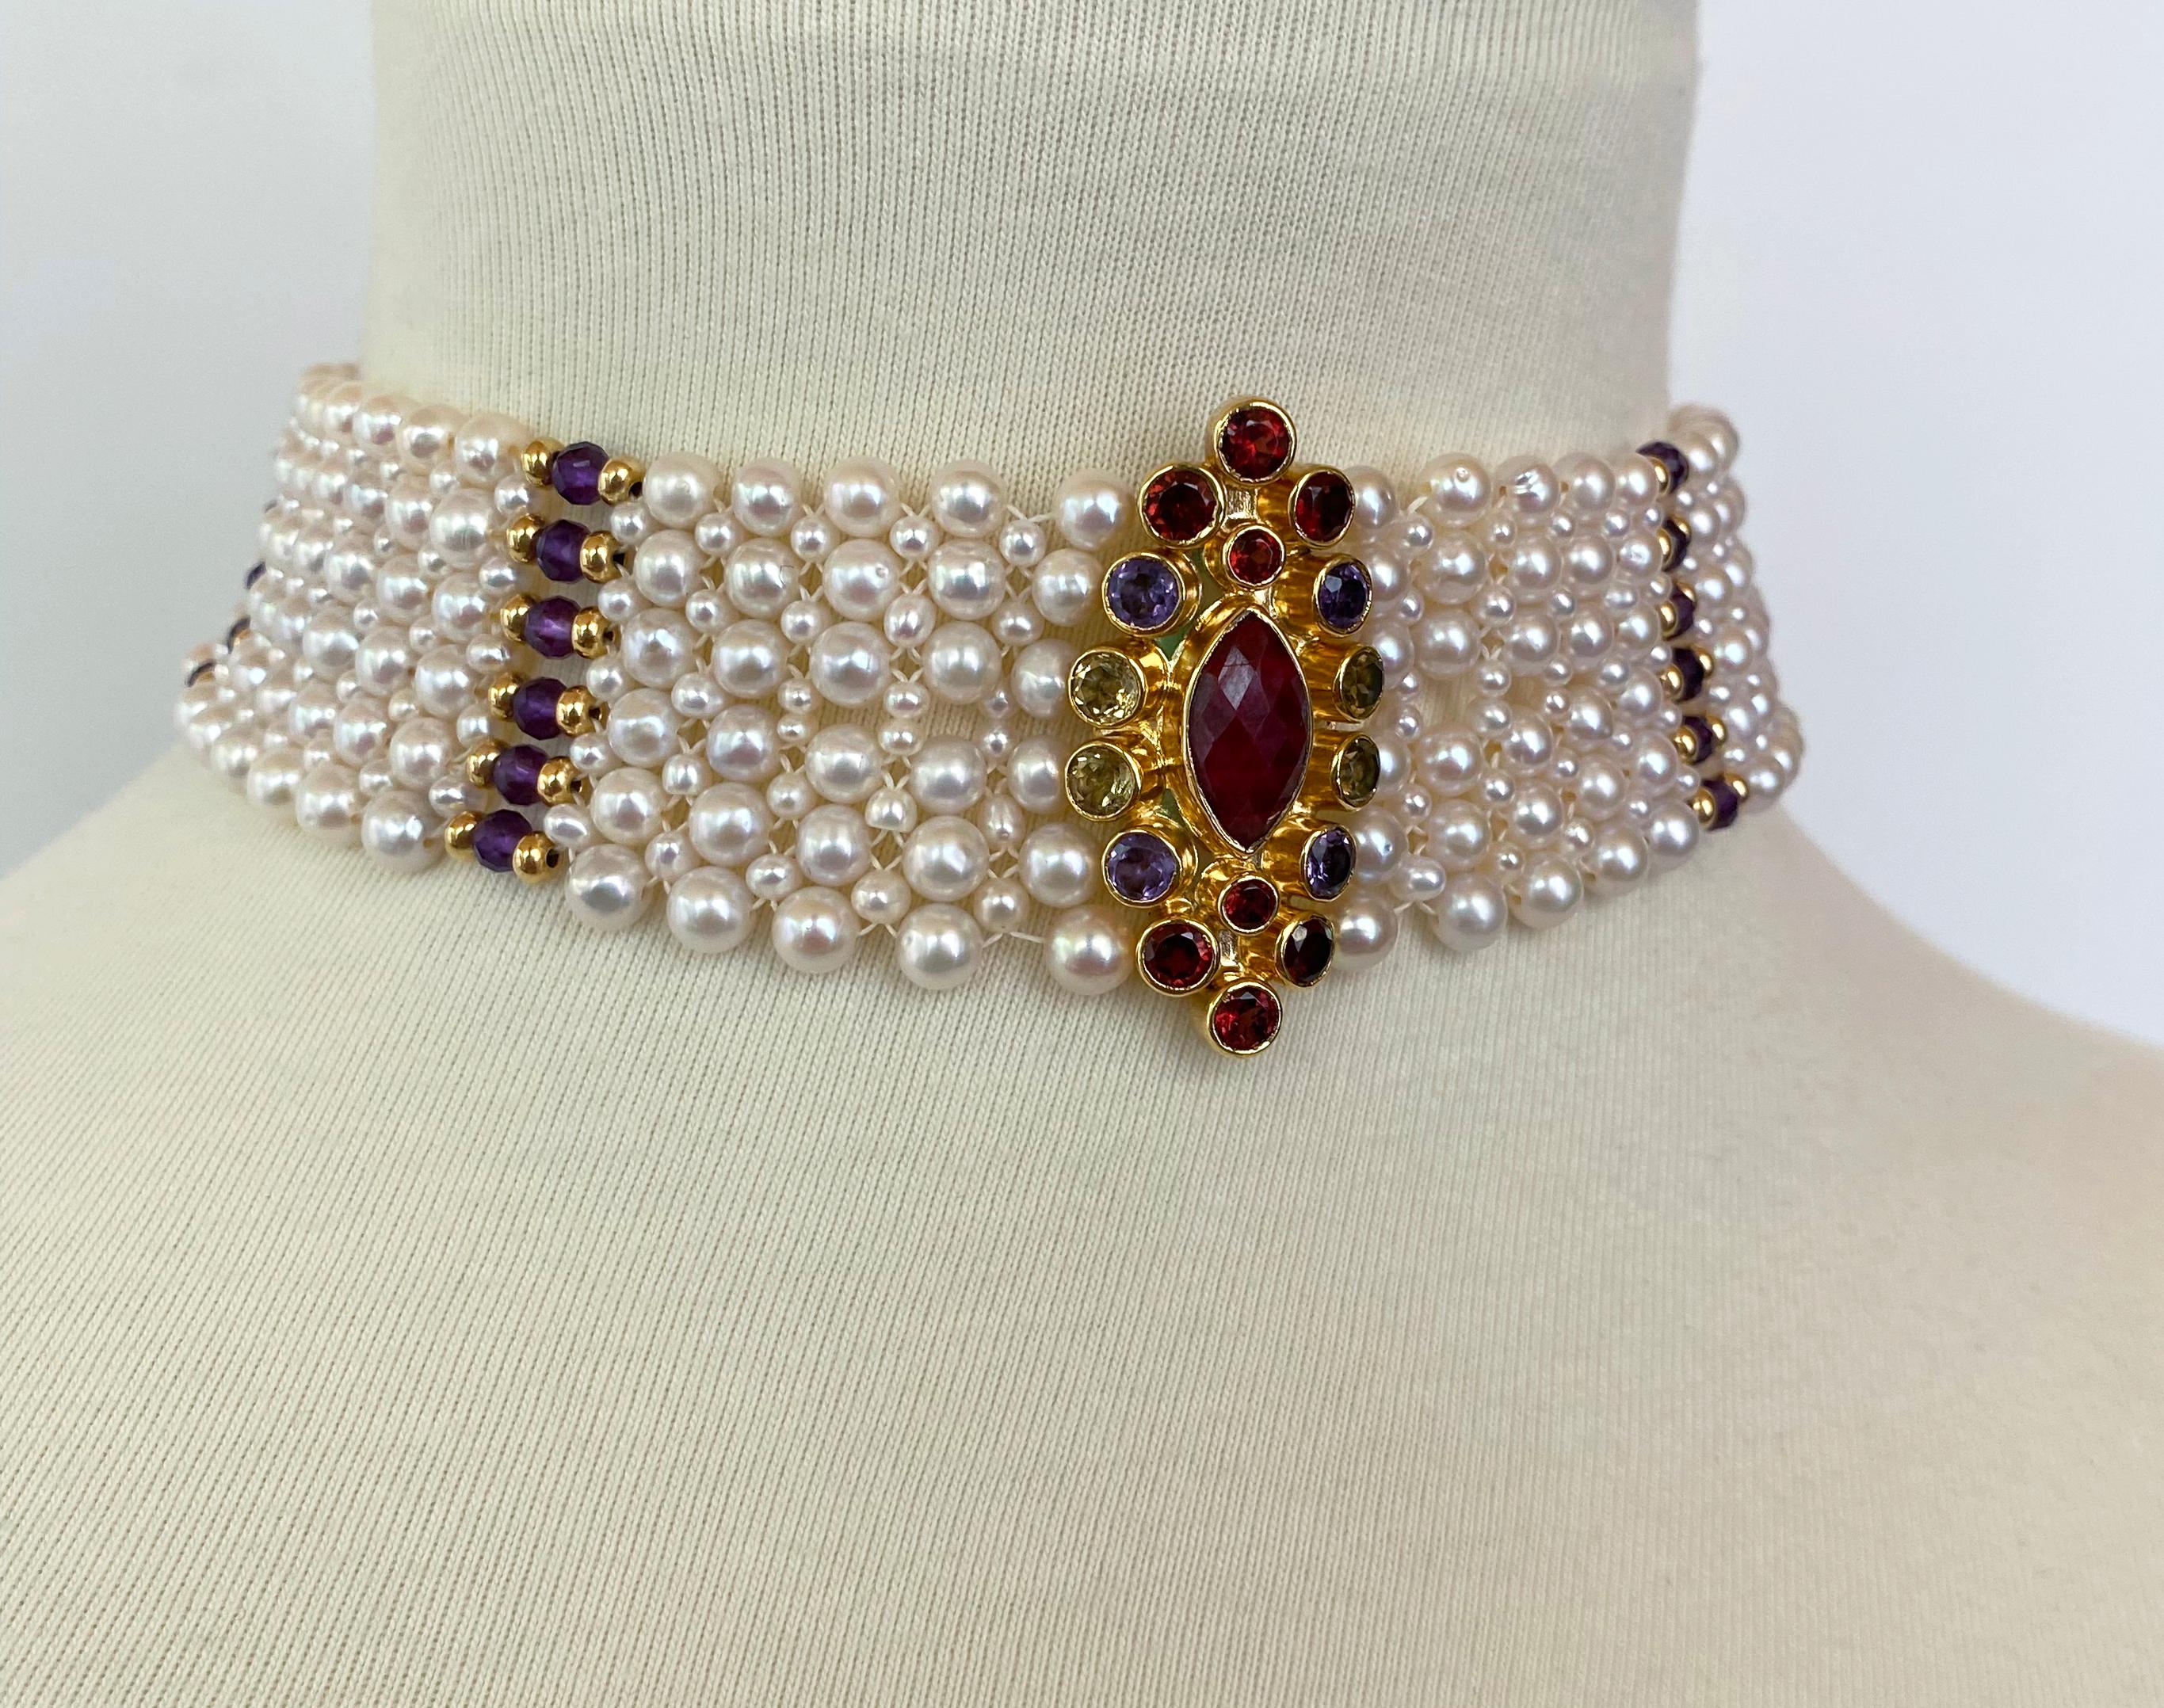 Gorgeous One of A Kind Choker made by Marina J . This elegant Choker is made of multi sized Pearls intricately woven together into a tight Lace like design. The Pearls are woven with a slight graduation allowing this Choker to sit perfectly along